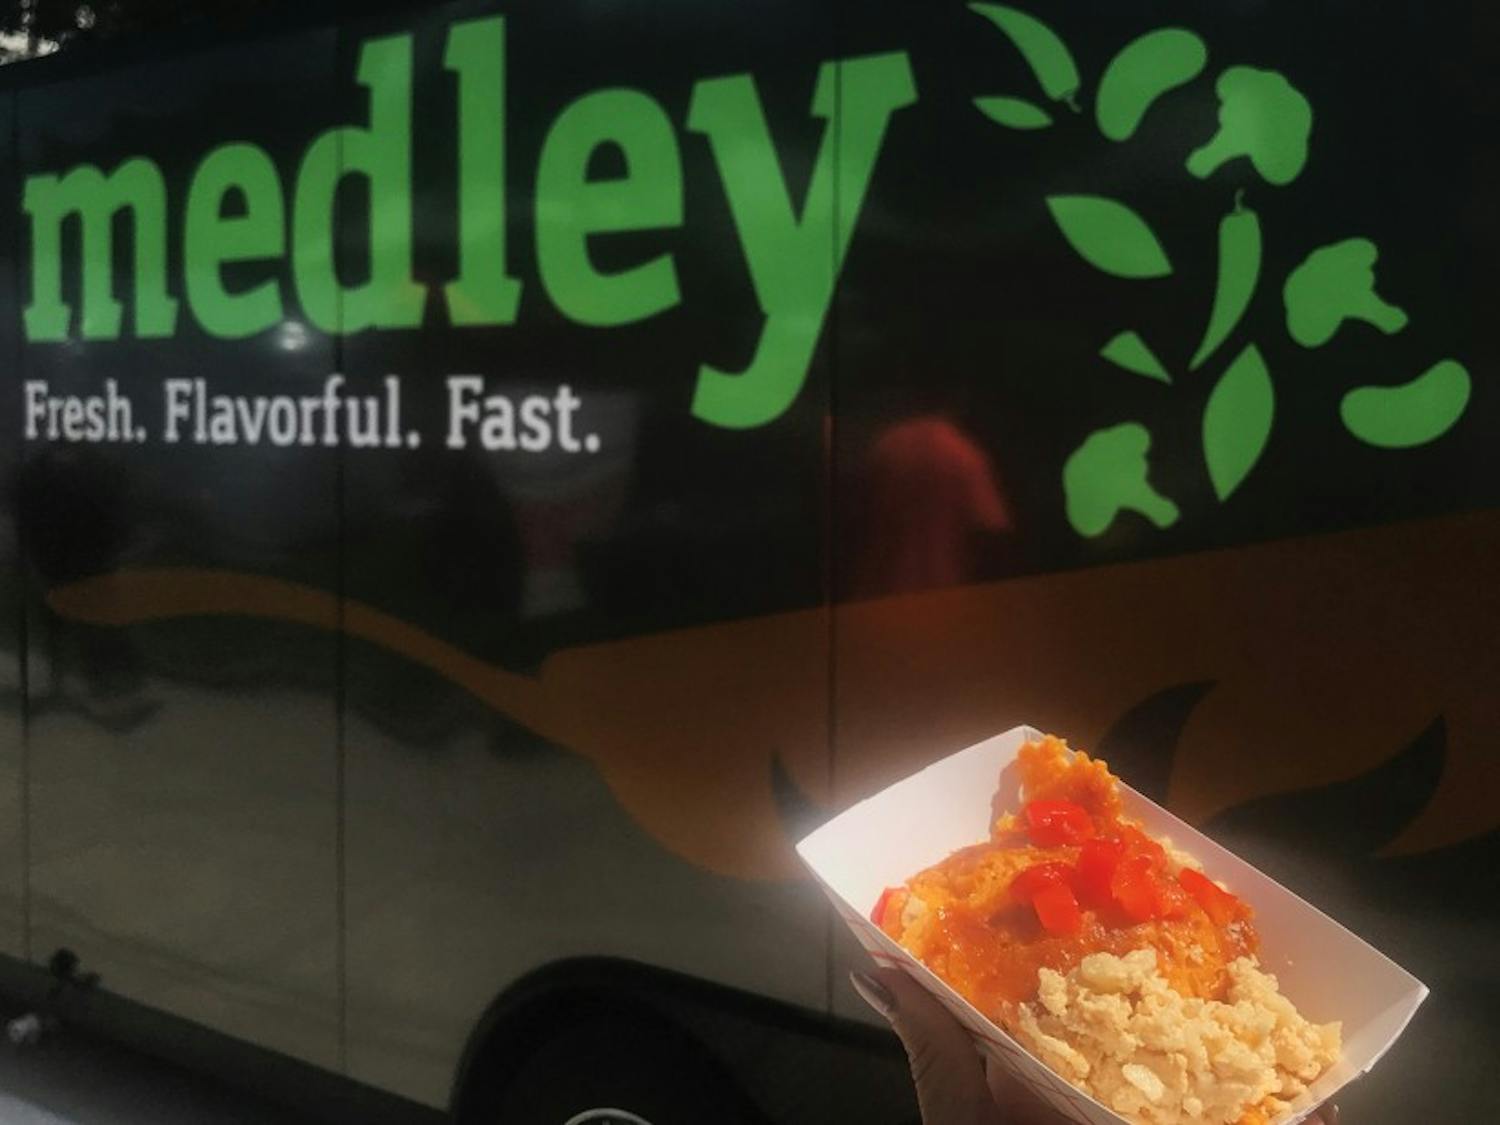 Medley is a healthy food truck, featuring salads, grilled chicken and cauliflower mac n' cheese. 